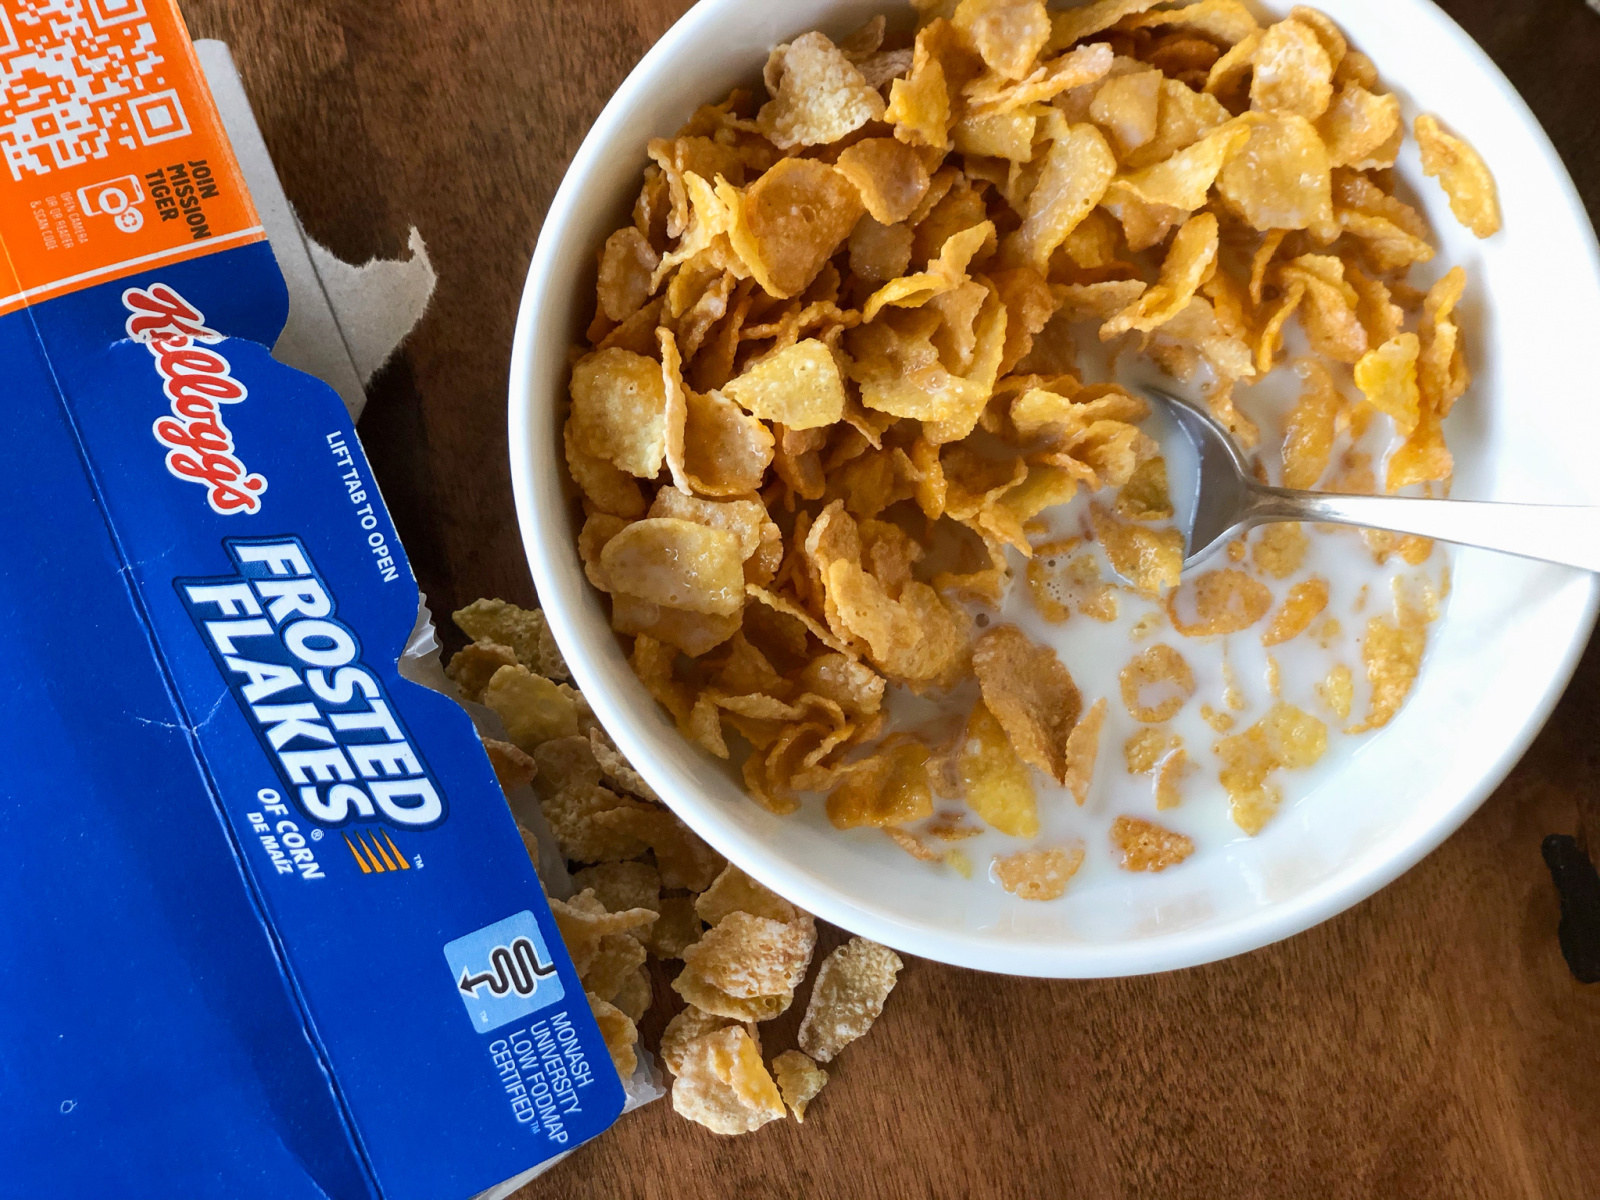 Giant Size Boxes Of Kellogg's Cereal As Low As $ At Kroger -  iHeartKroger